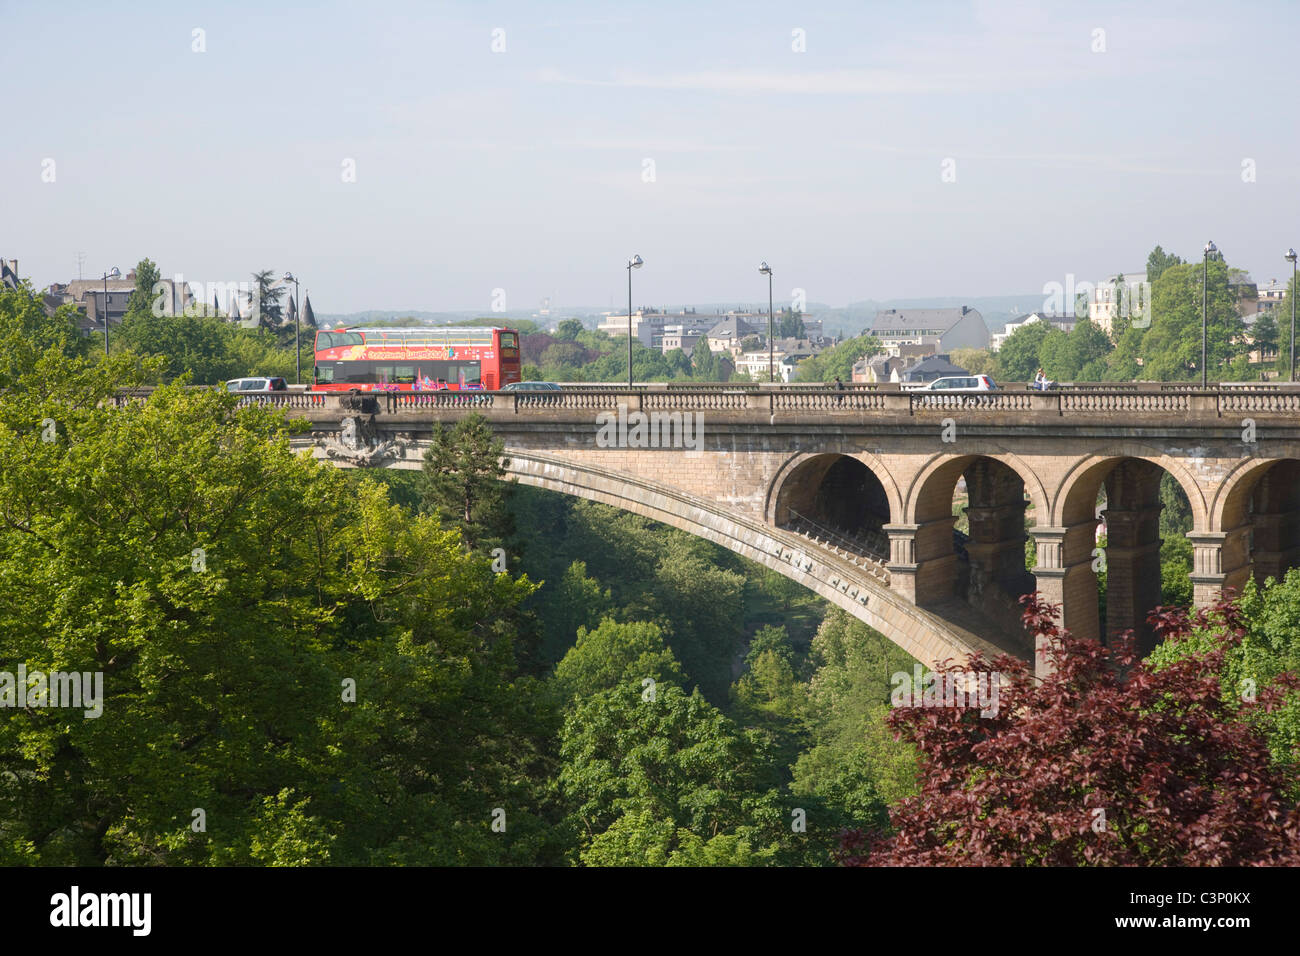 Ponte Adolphe bridge spans over the Petrusse valley Stock Photo